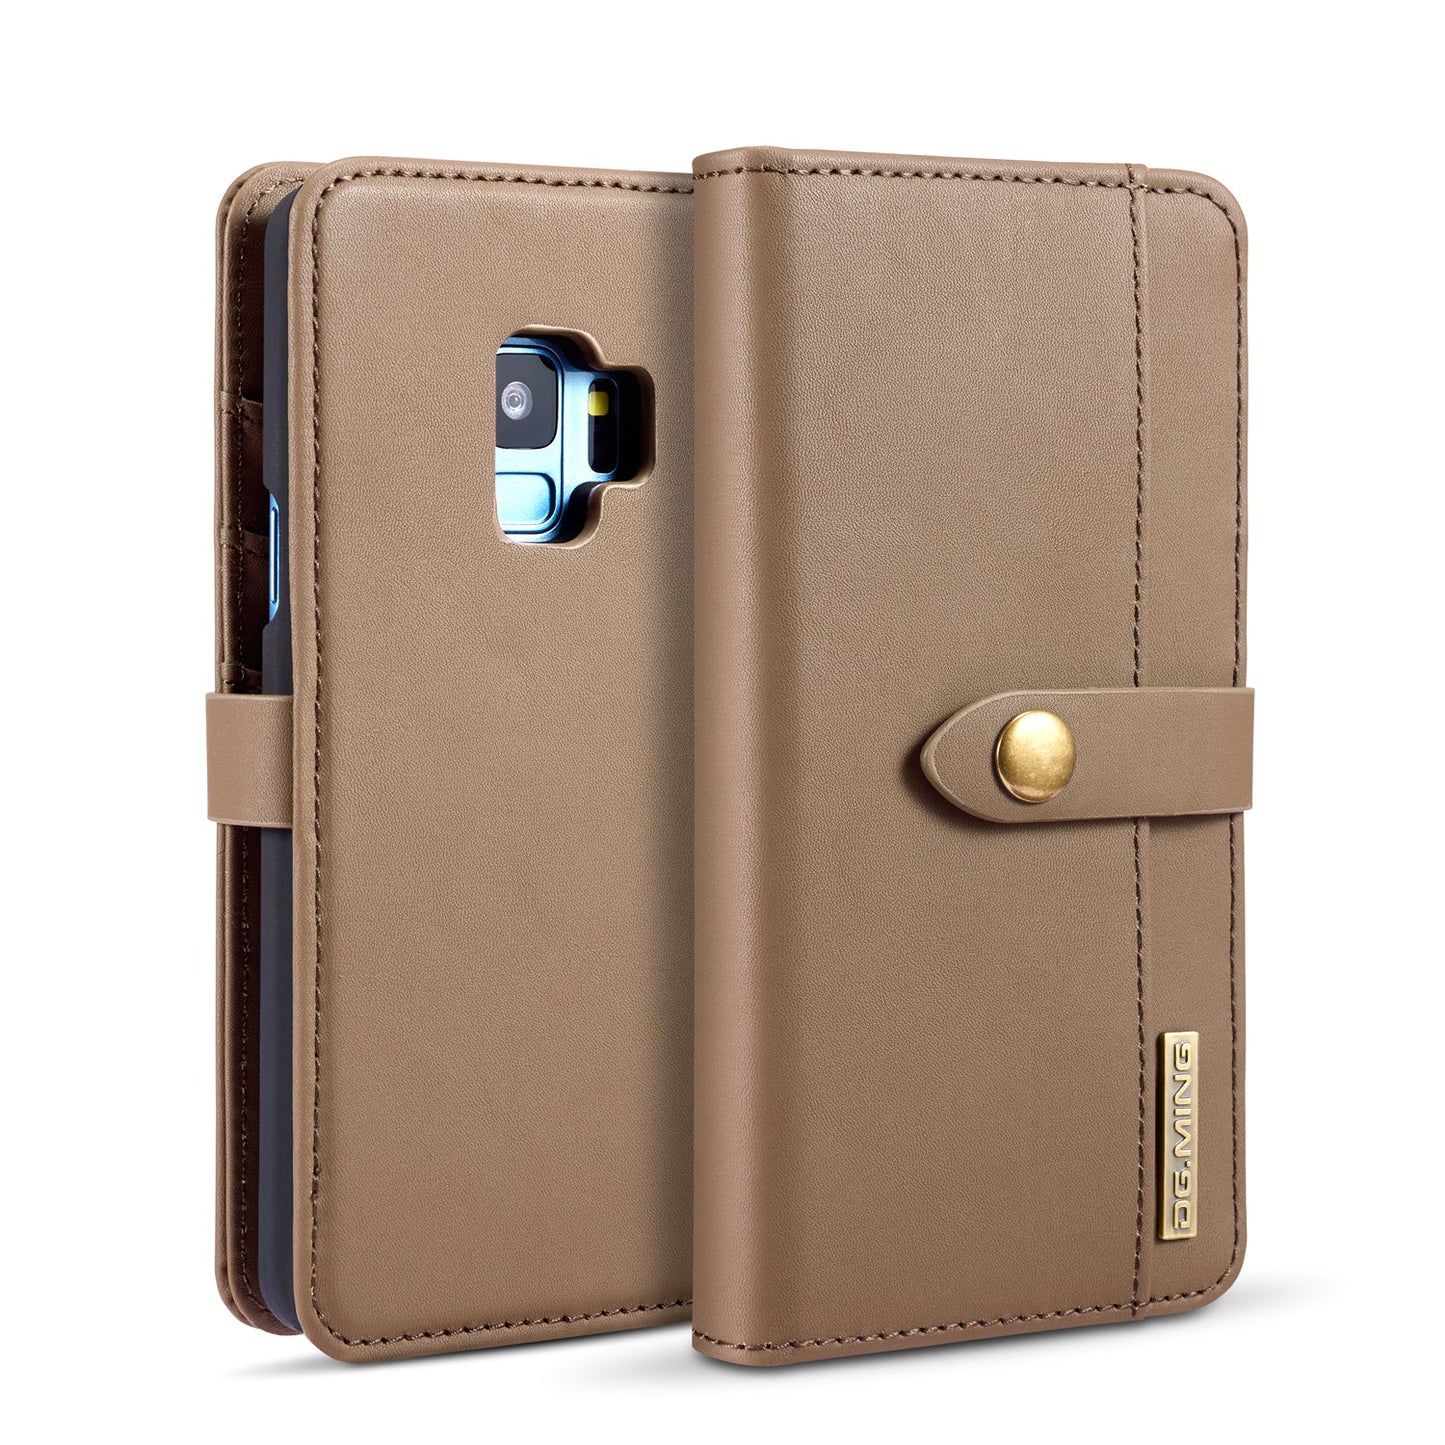 Flip Leather Card Holder Case for S8/S8 Plus/S9/S9 Plus